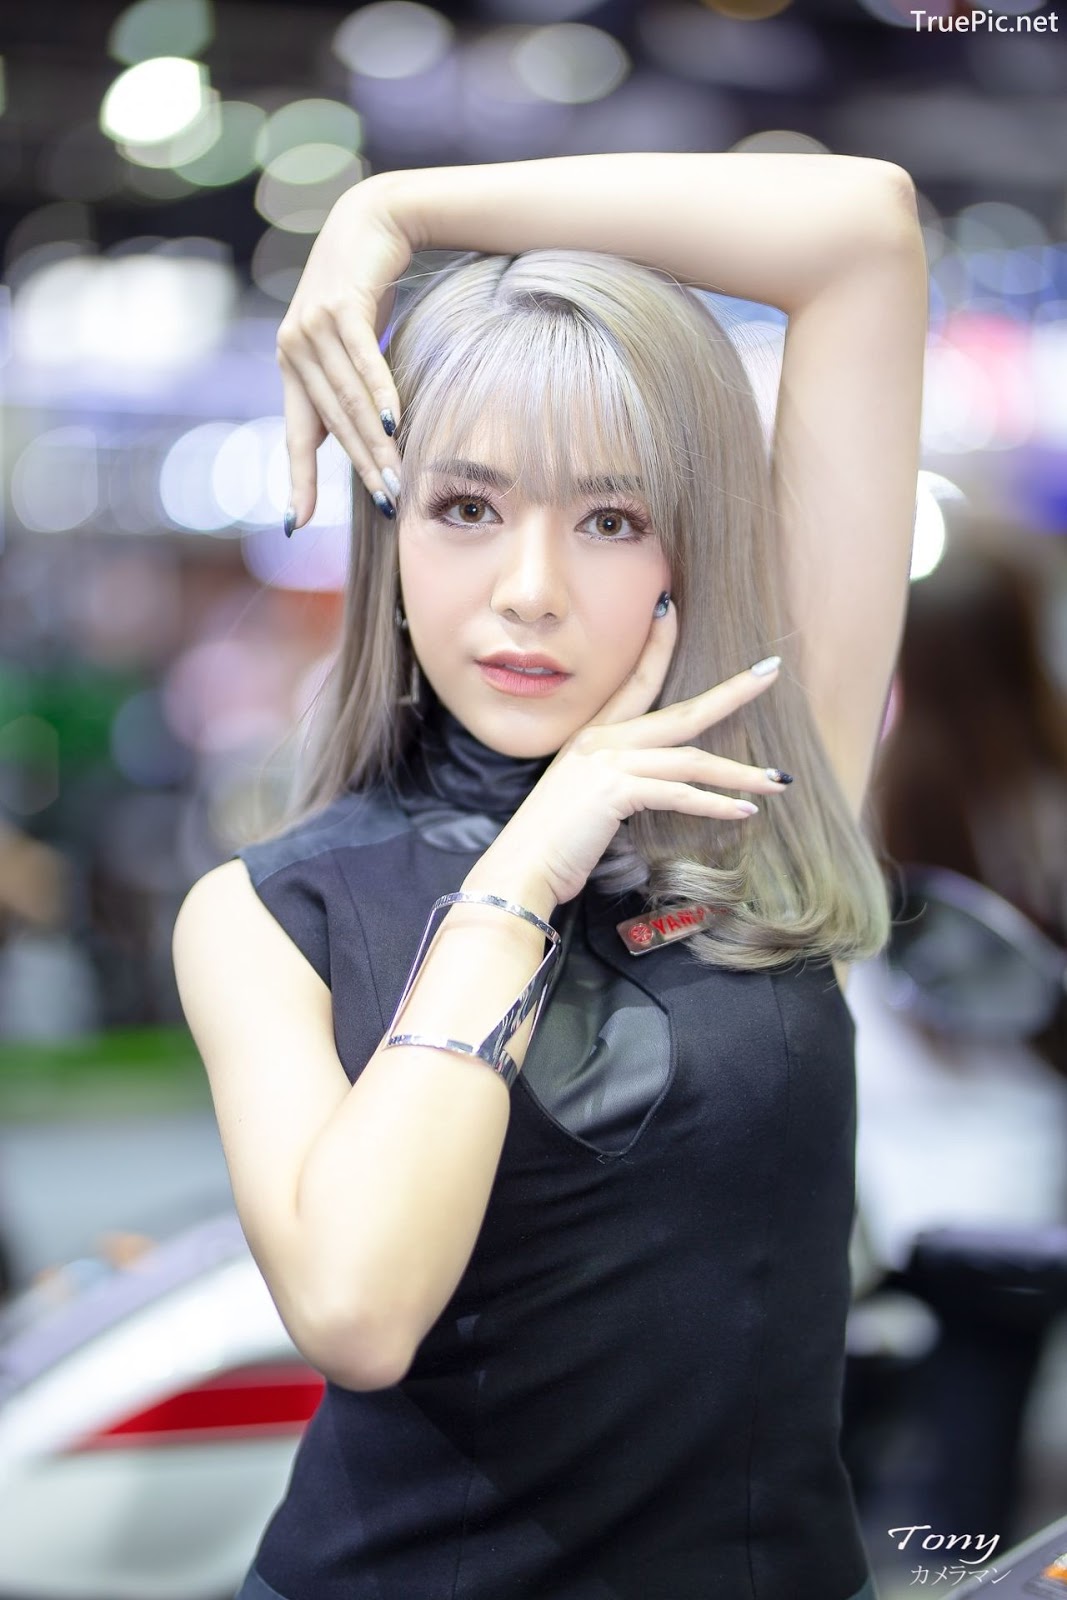 Image-Thailand-Hot-Model-Thai-Racing-Girl-At-Motor-Expo-2019-TruePic.net- Picture-52